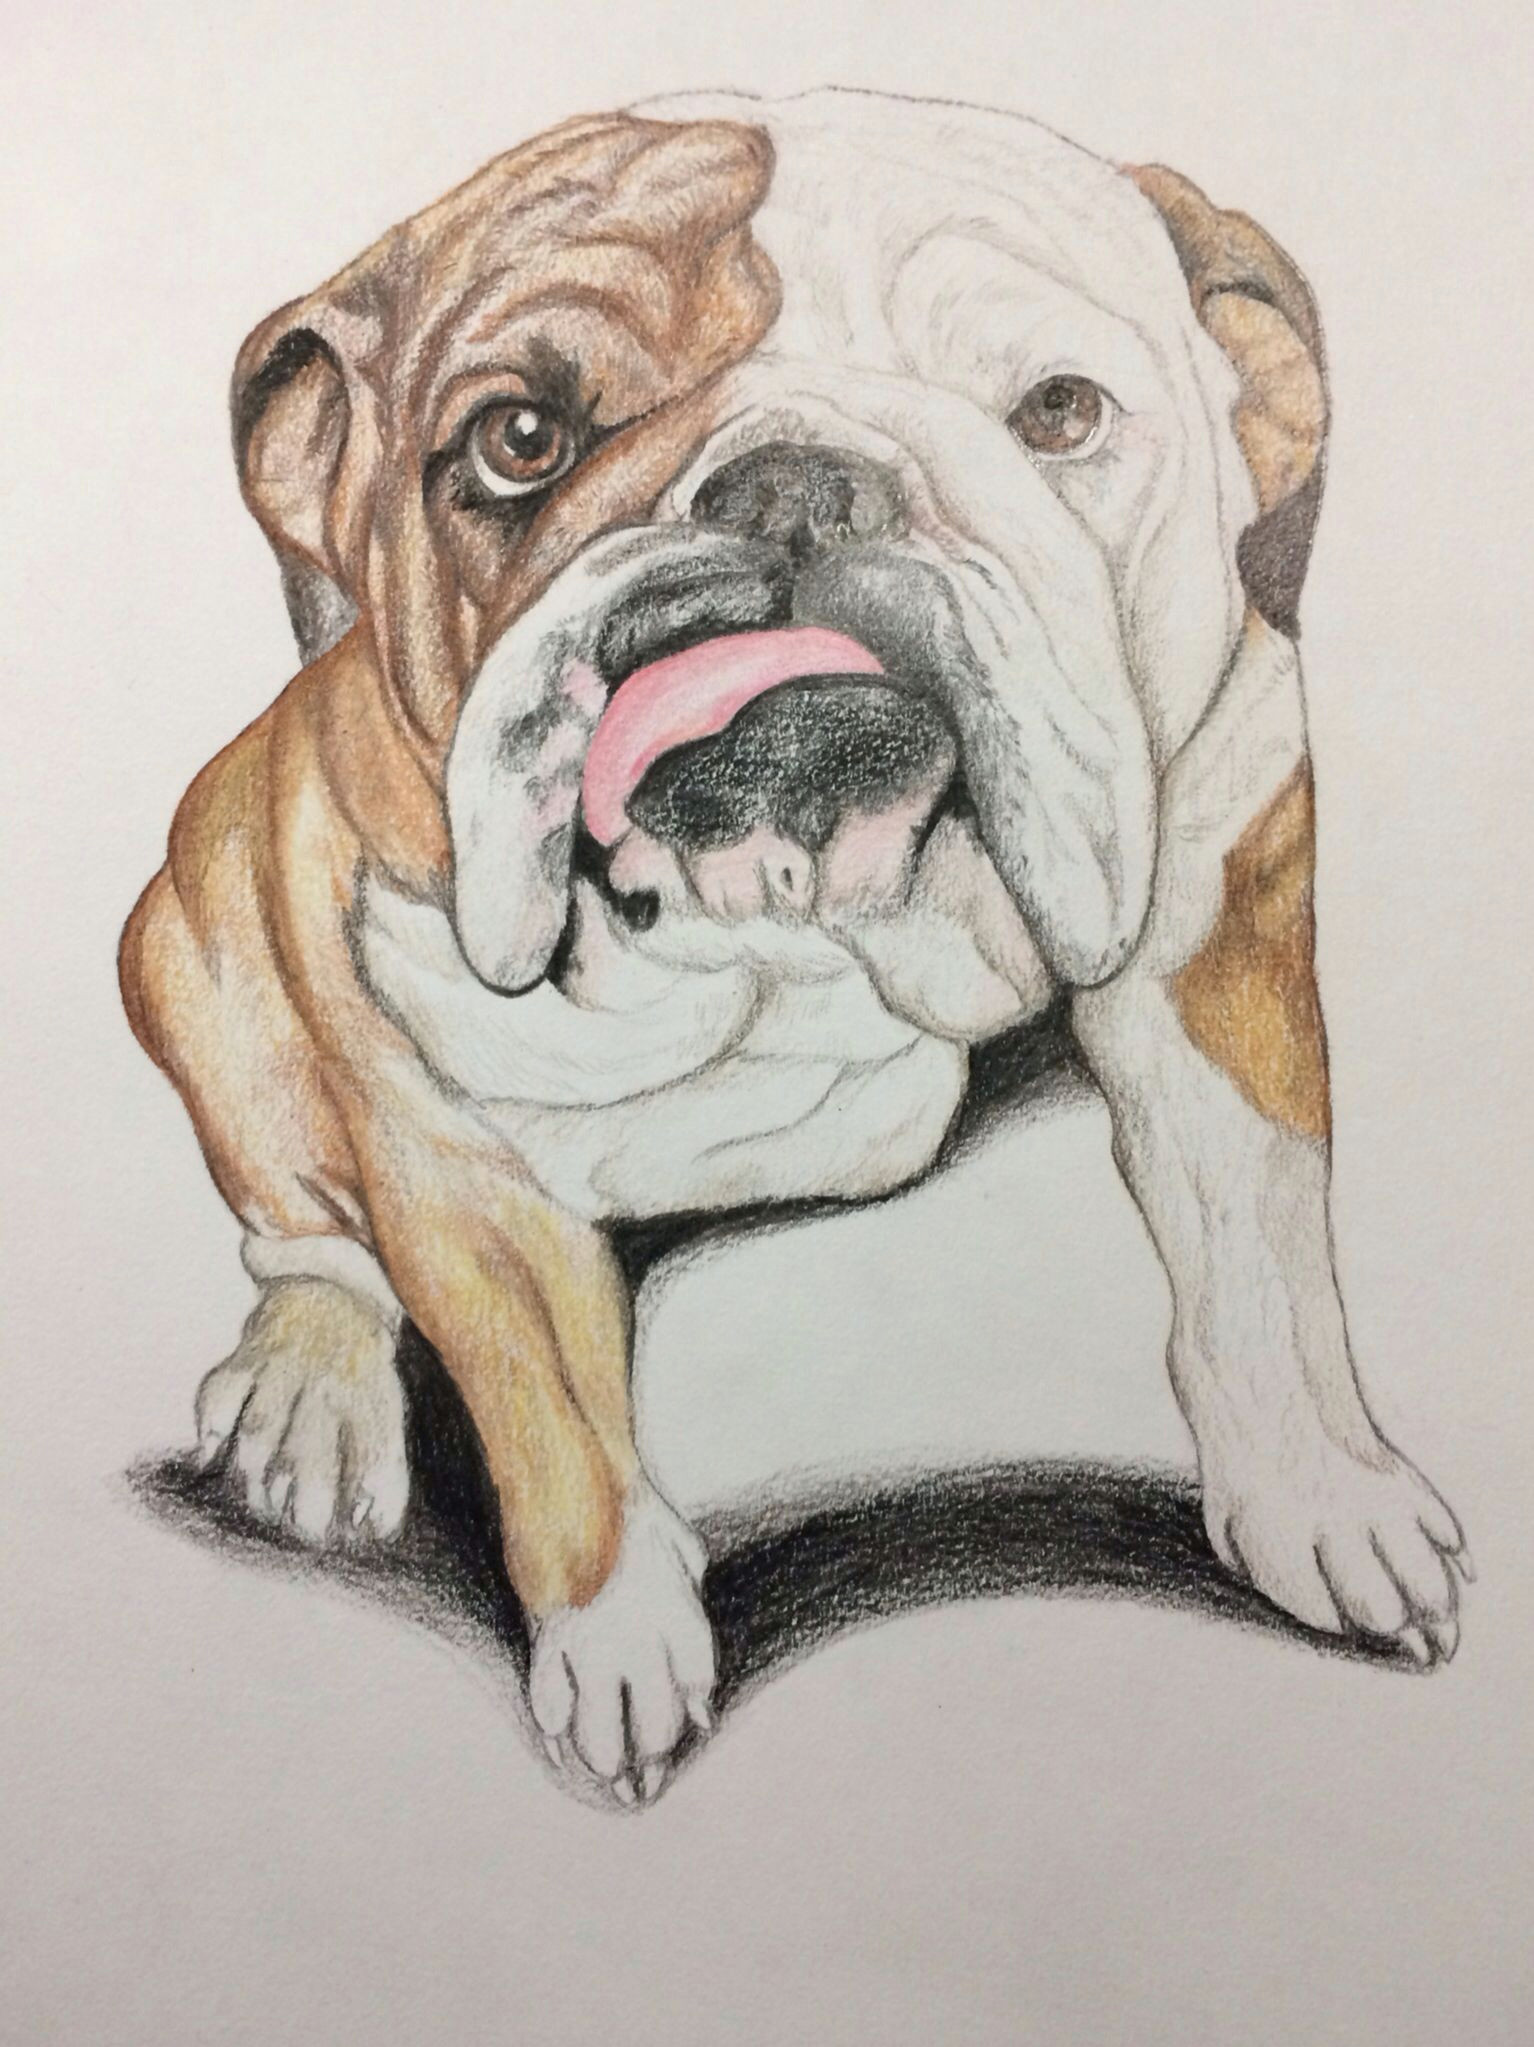 i love drawing and bulldogs are my specialty follow me on instagram and twitter artisticbulldog